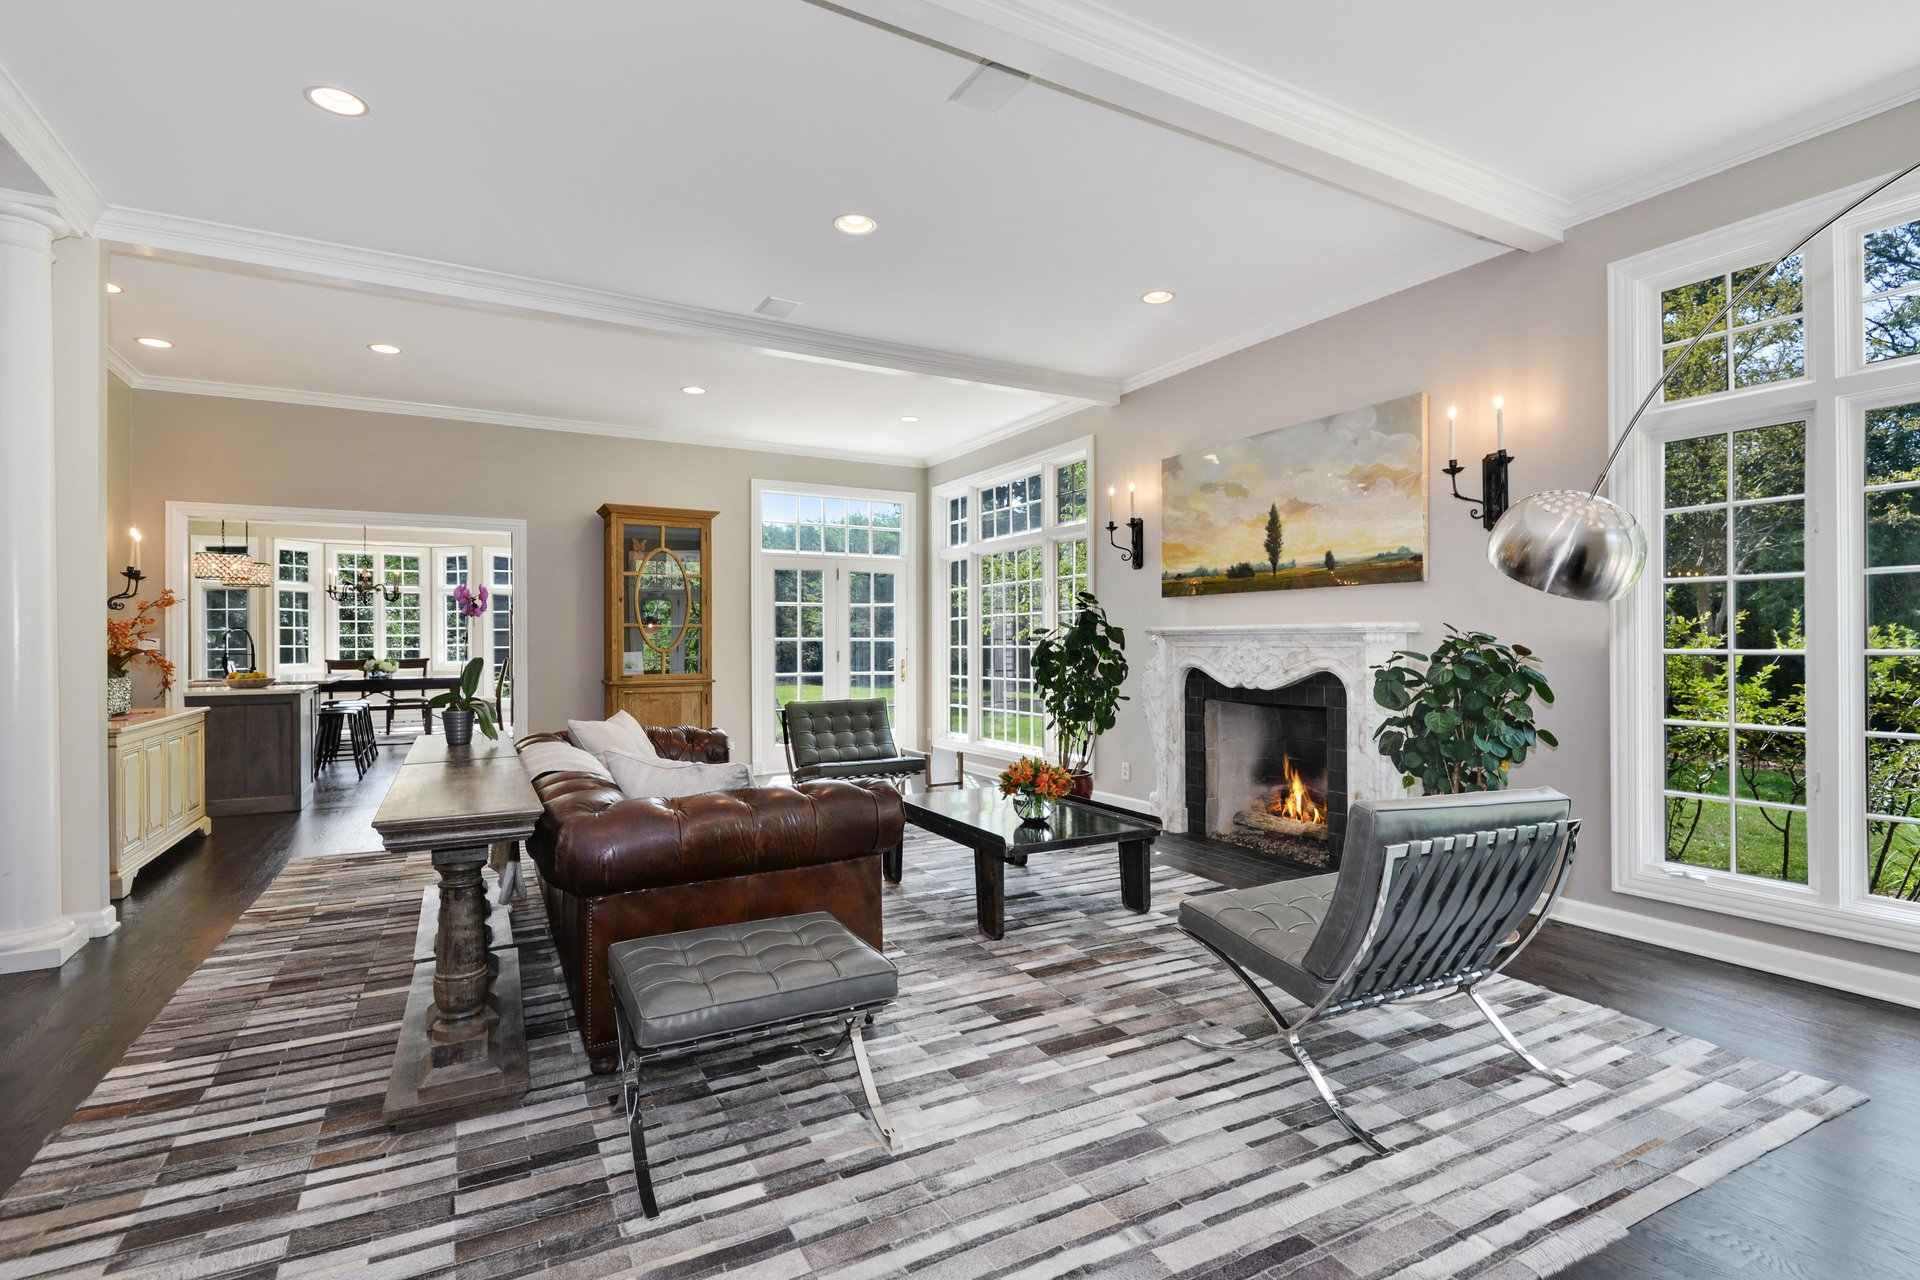 Living room with a fireplace in lake forest